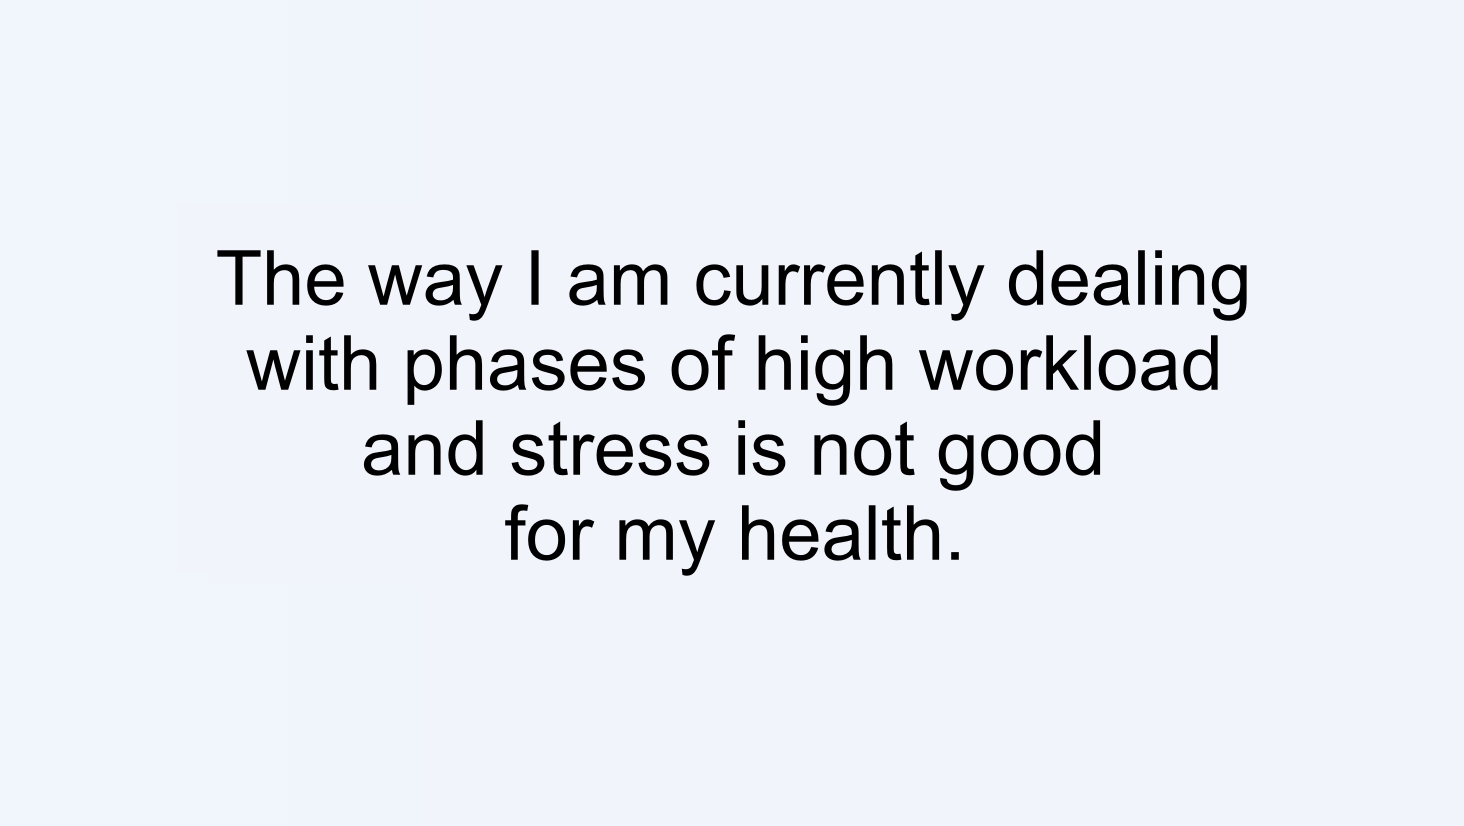 The way I am currently dealing with phases of high workload and stress is not good for my health.